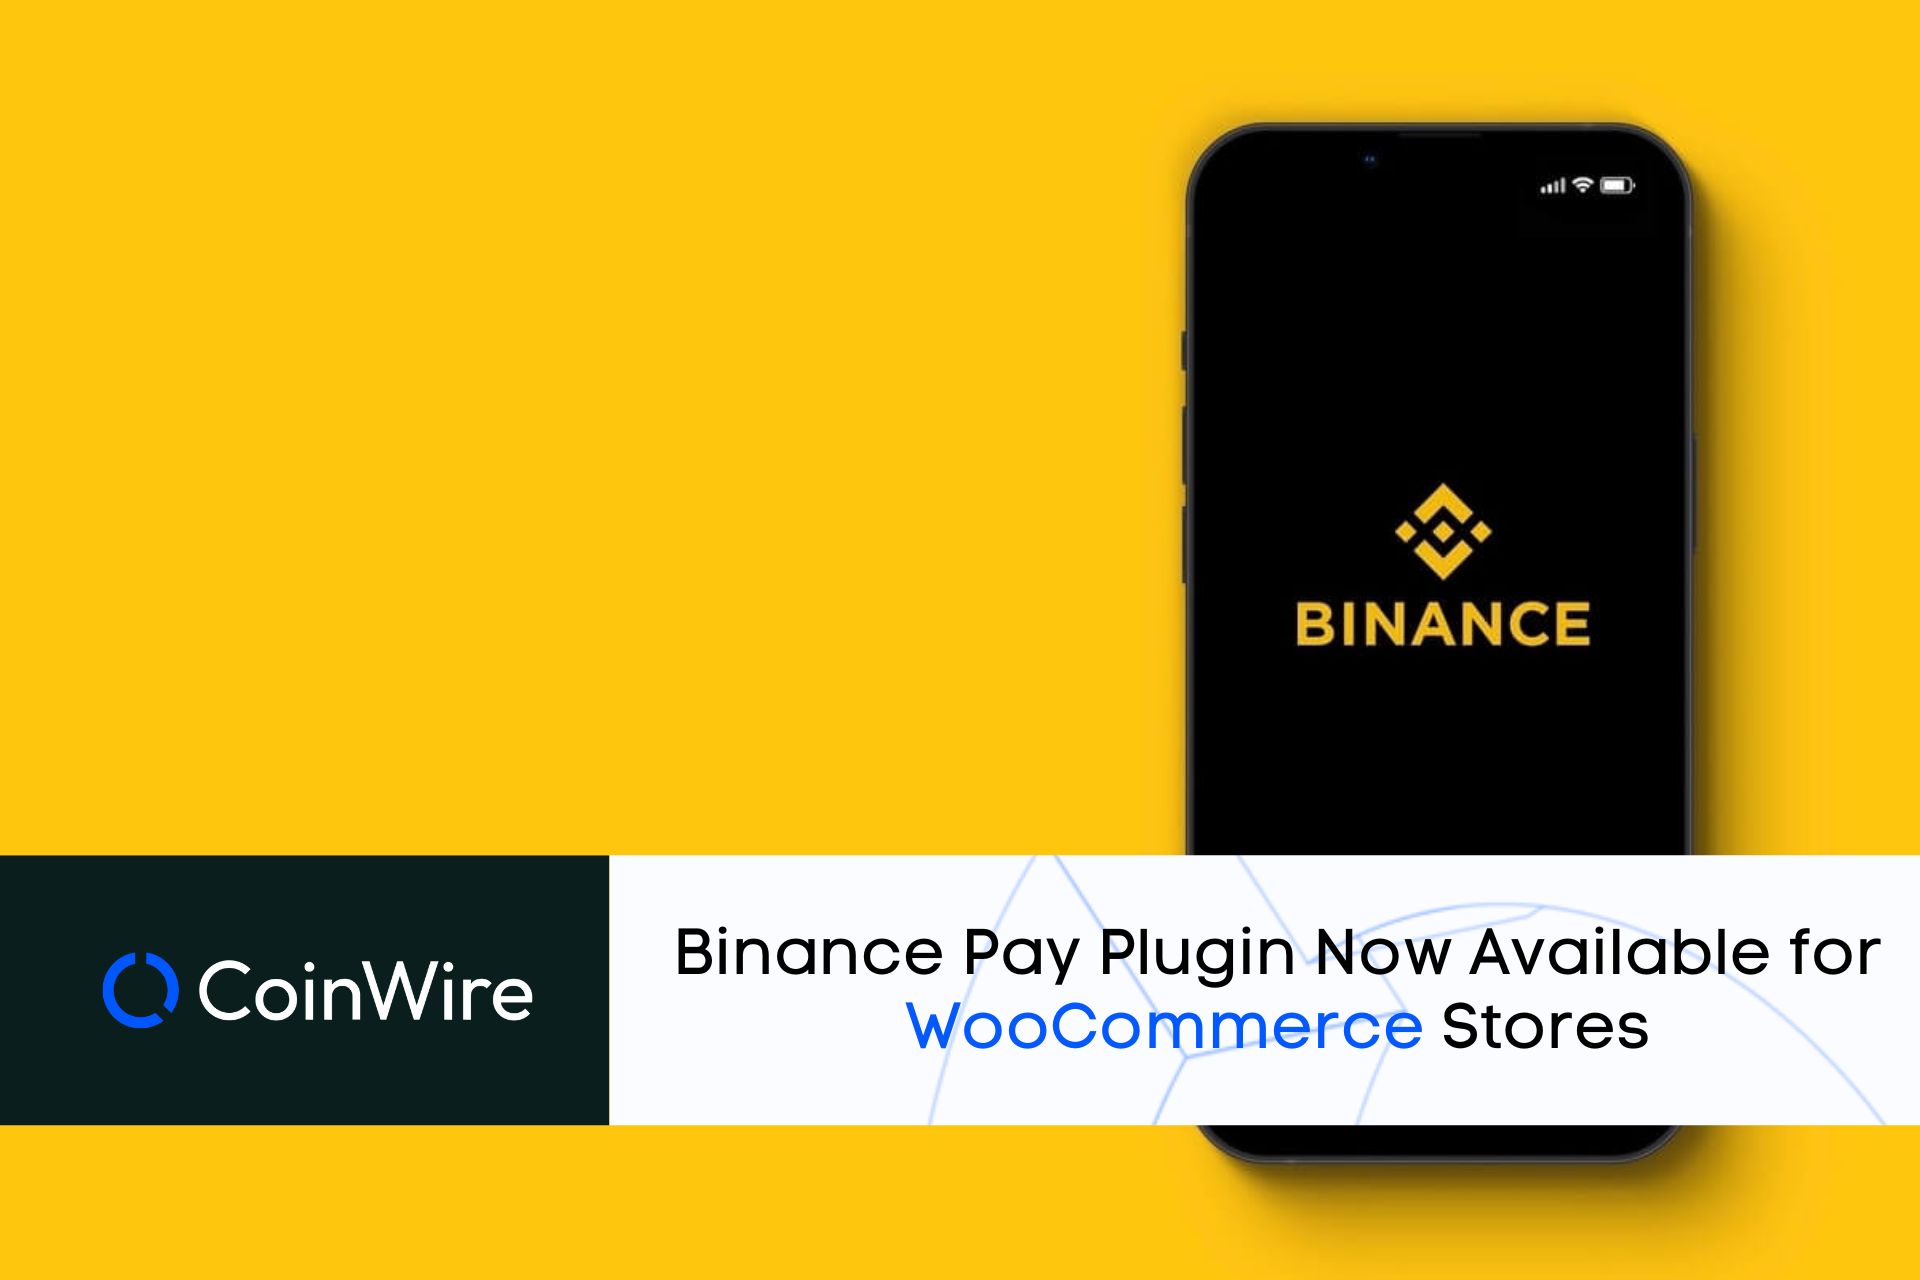 Binance Pay Plugin Now Available For Woocommerce Stores